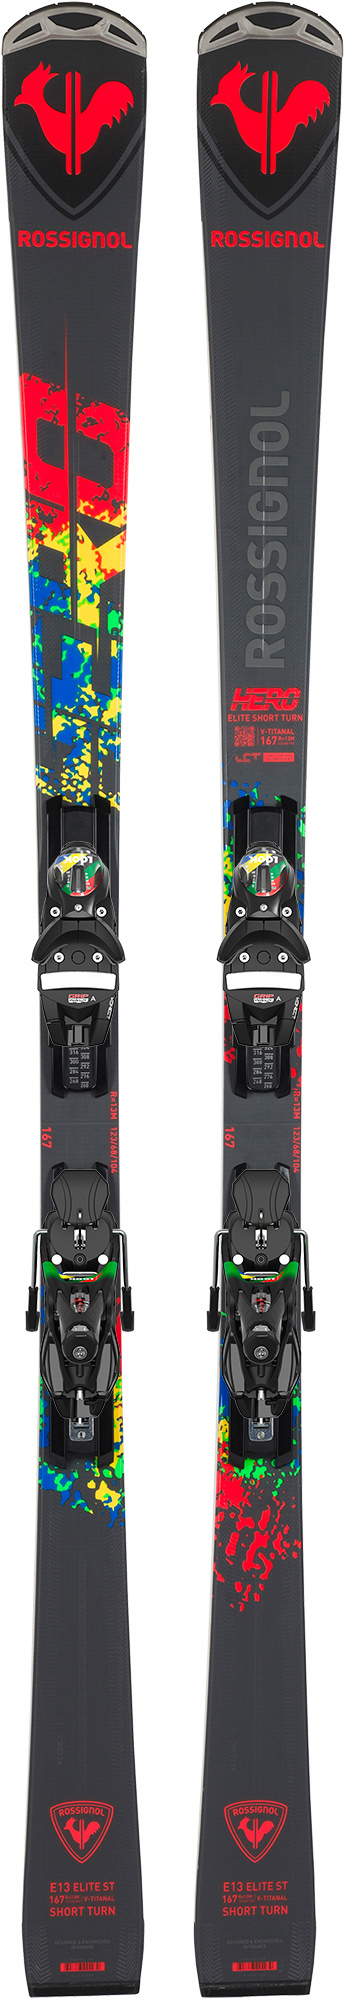 – Winter Goingsport Rossignol ST Elite (Limited Edition) TI